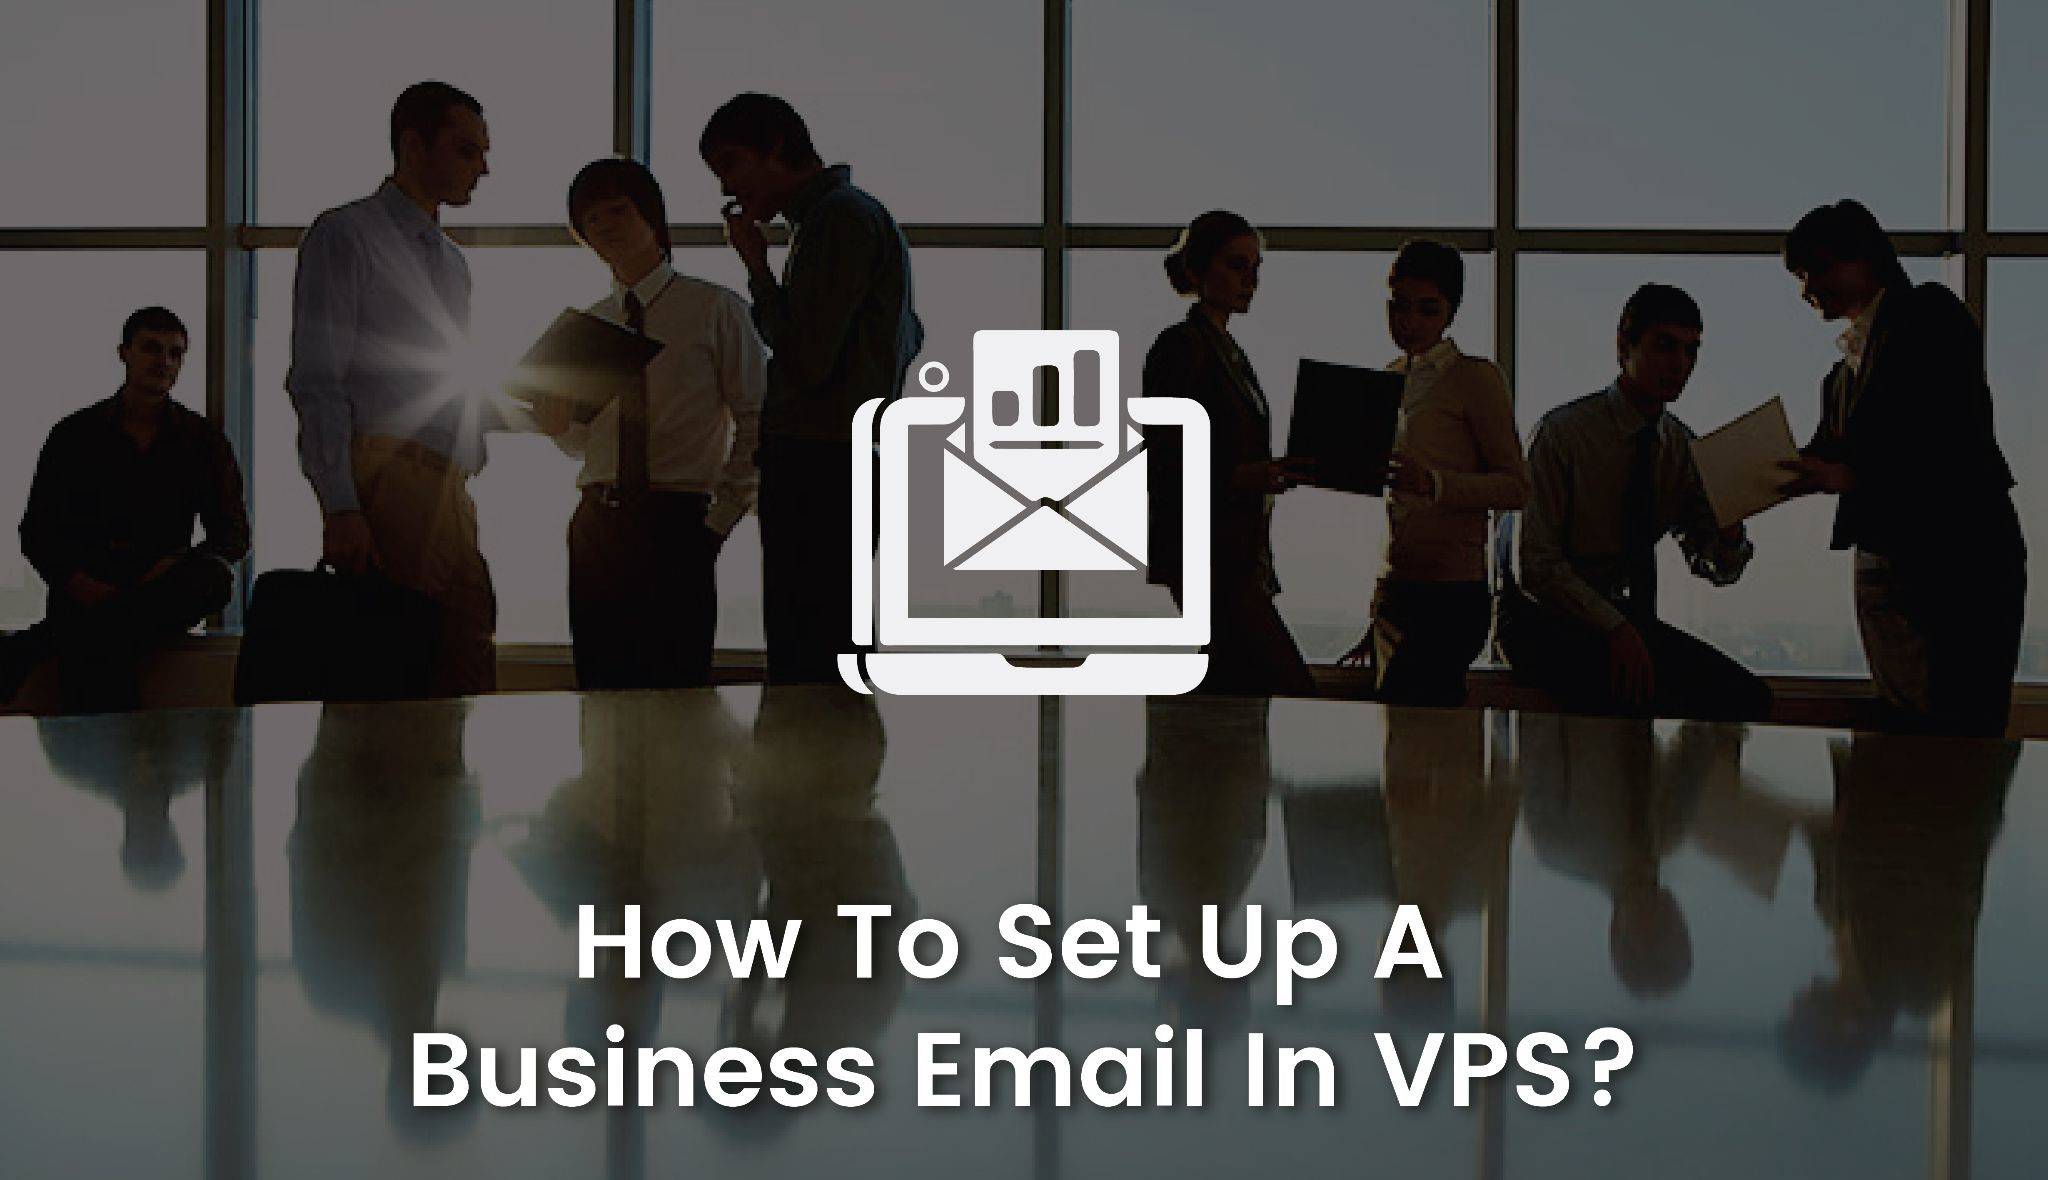 Setting Up Your Business Email on VPS